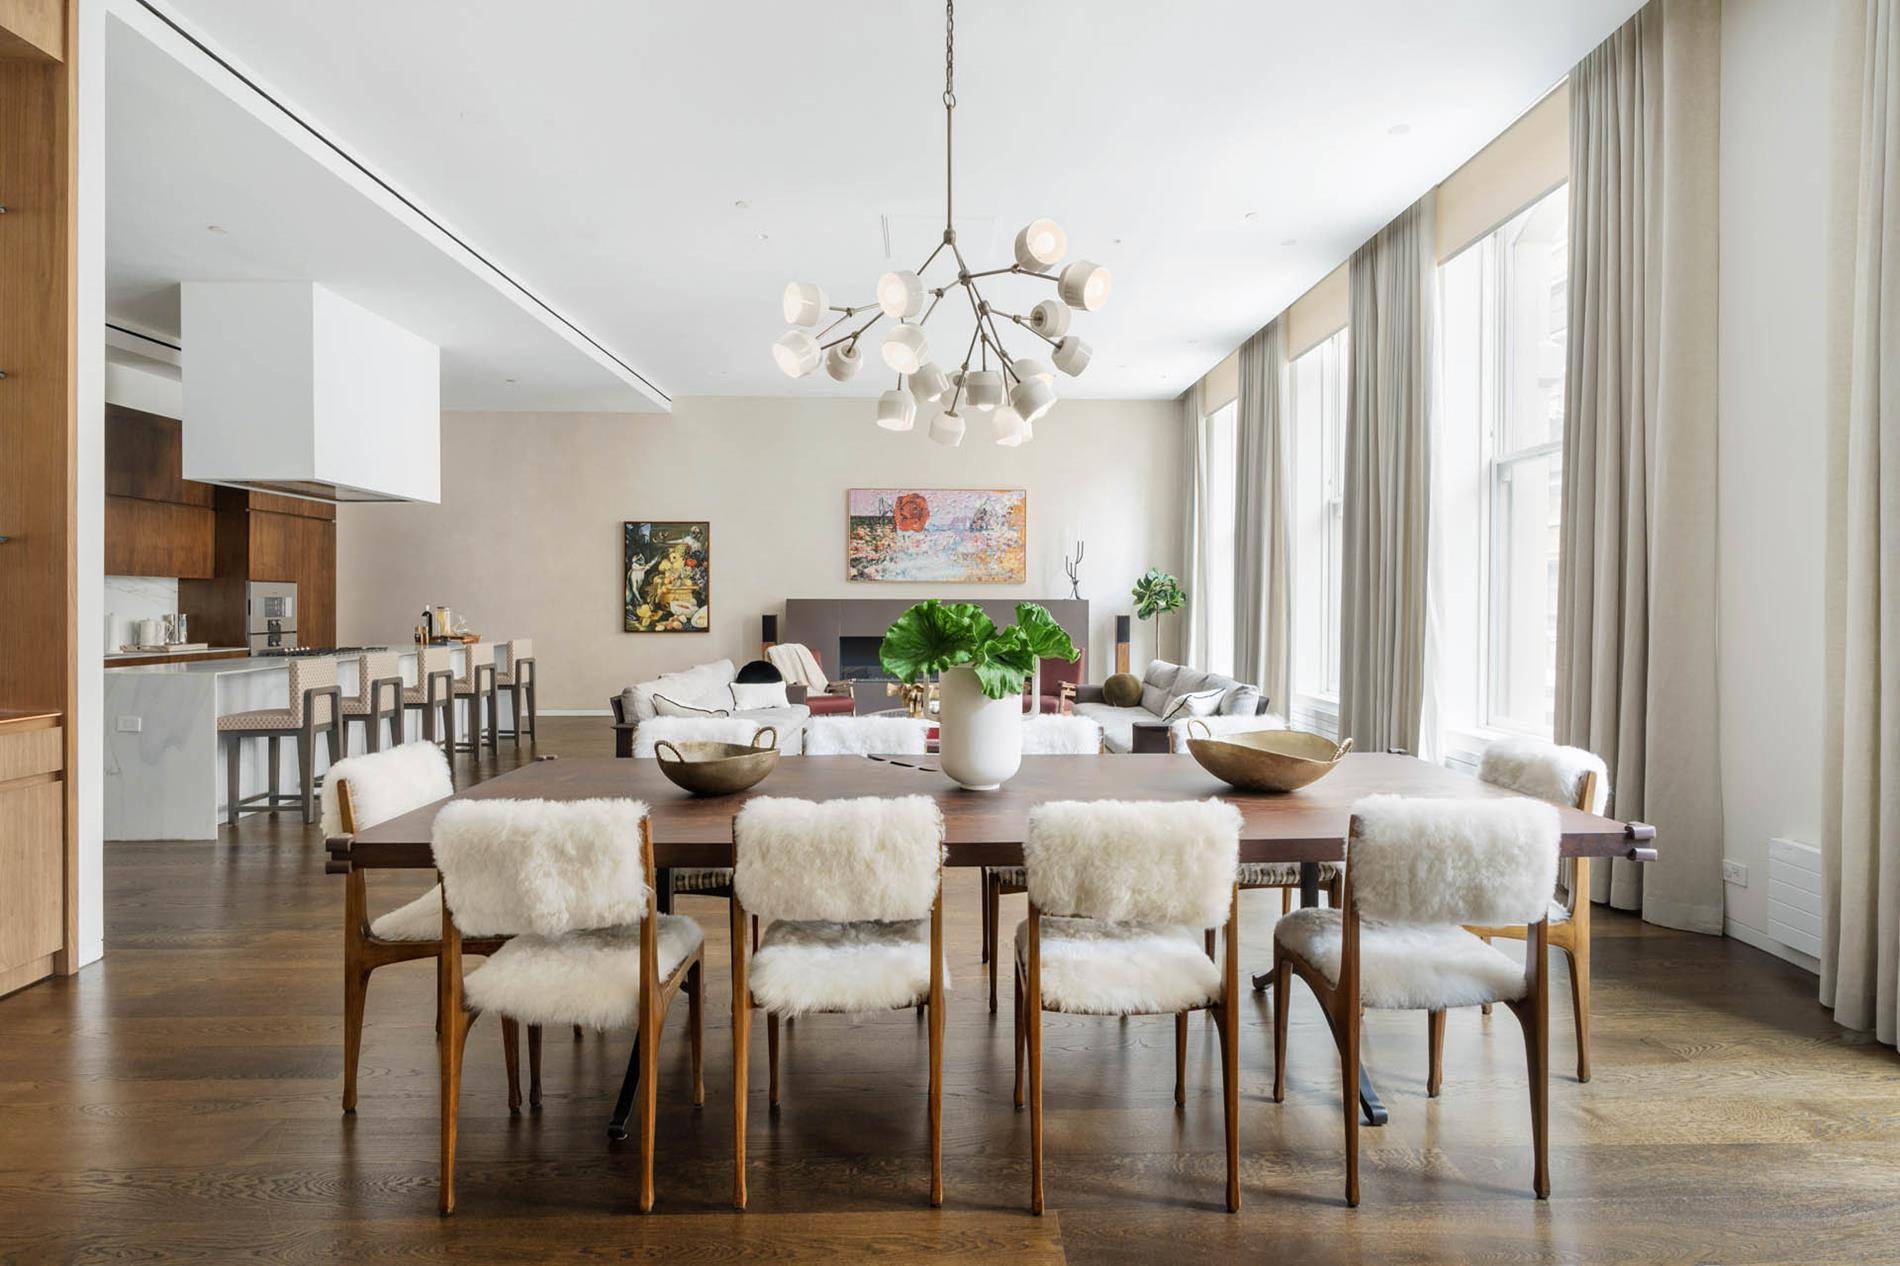 Presenting an unparalleled offering in the heart of Tribeca, this fully renovated and impeccably designed full floor residence at 52 Lispenard epitomizes sophistication and elegance.